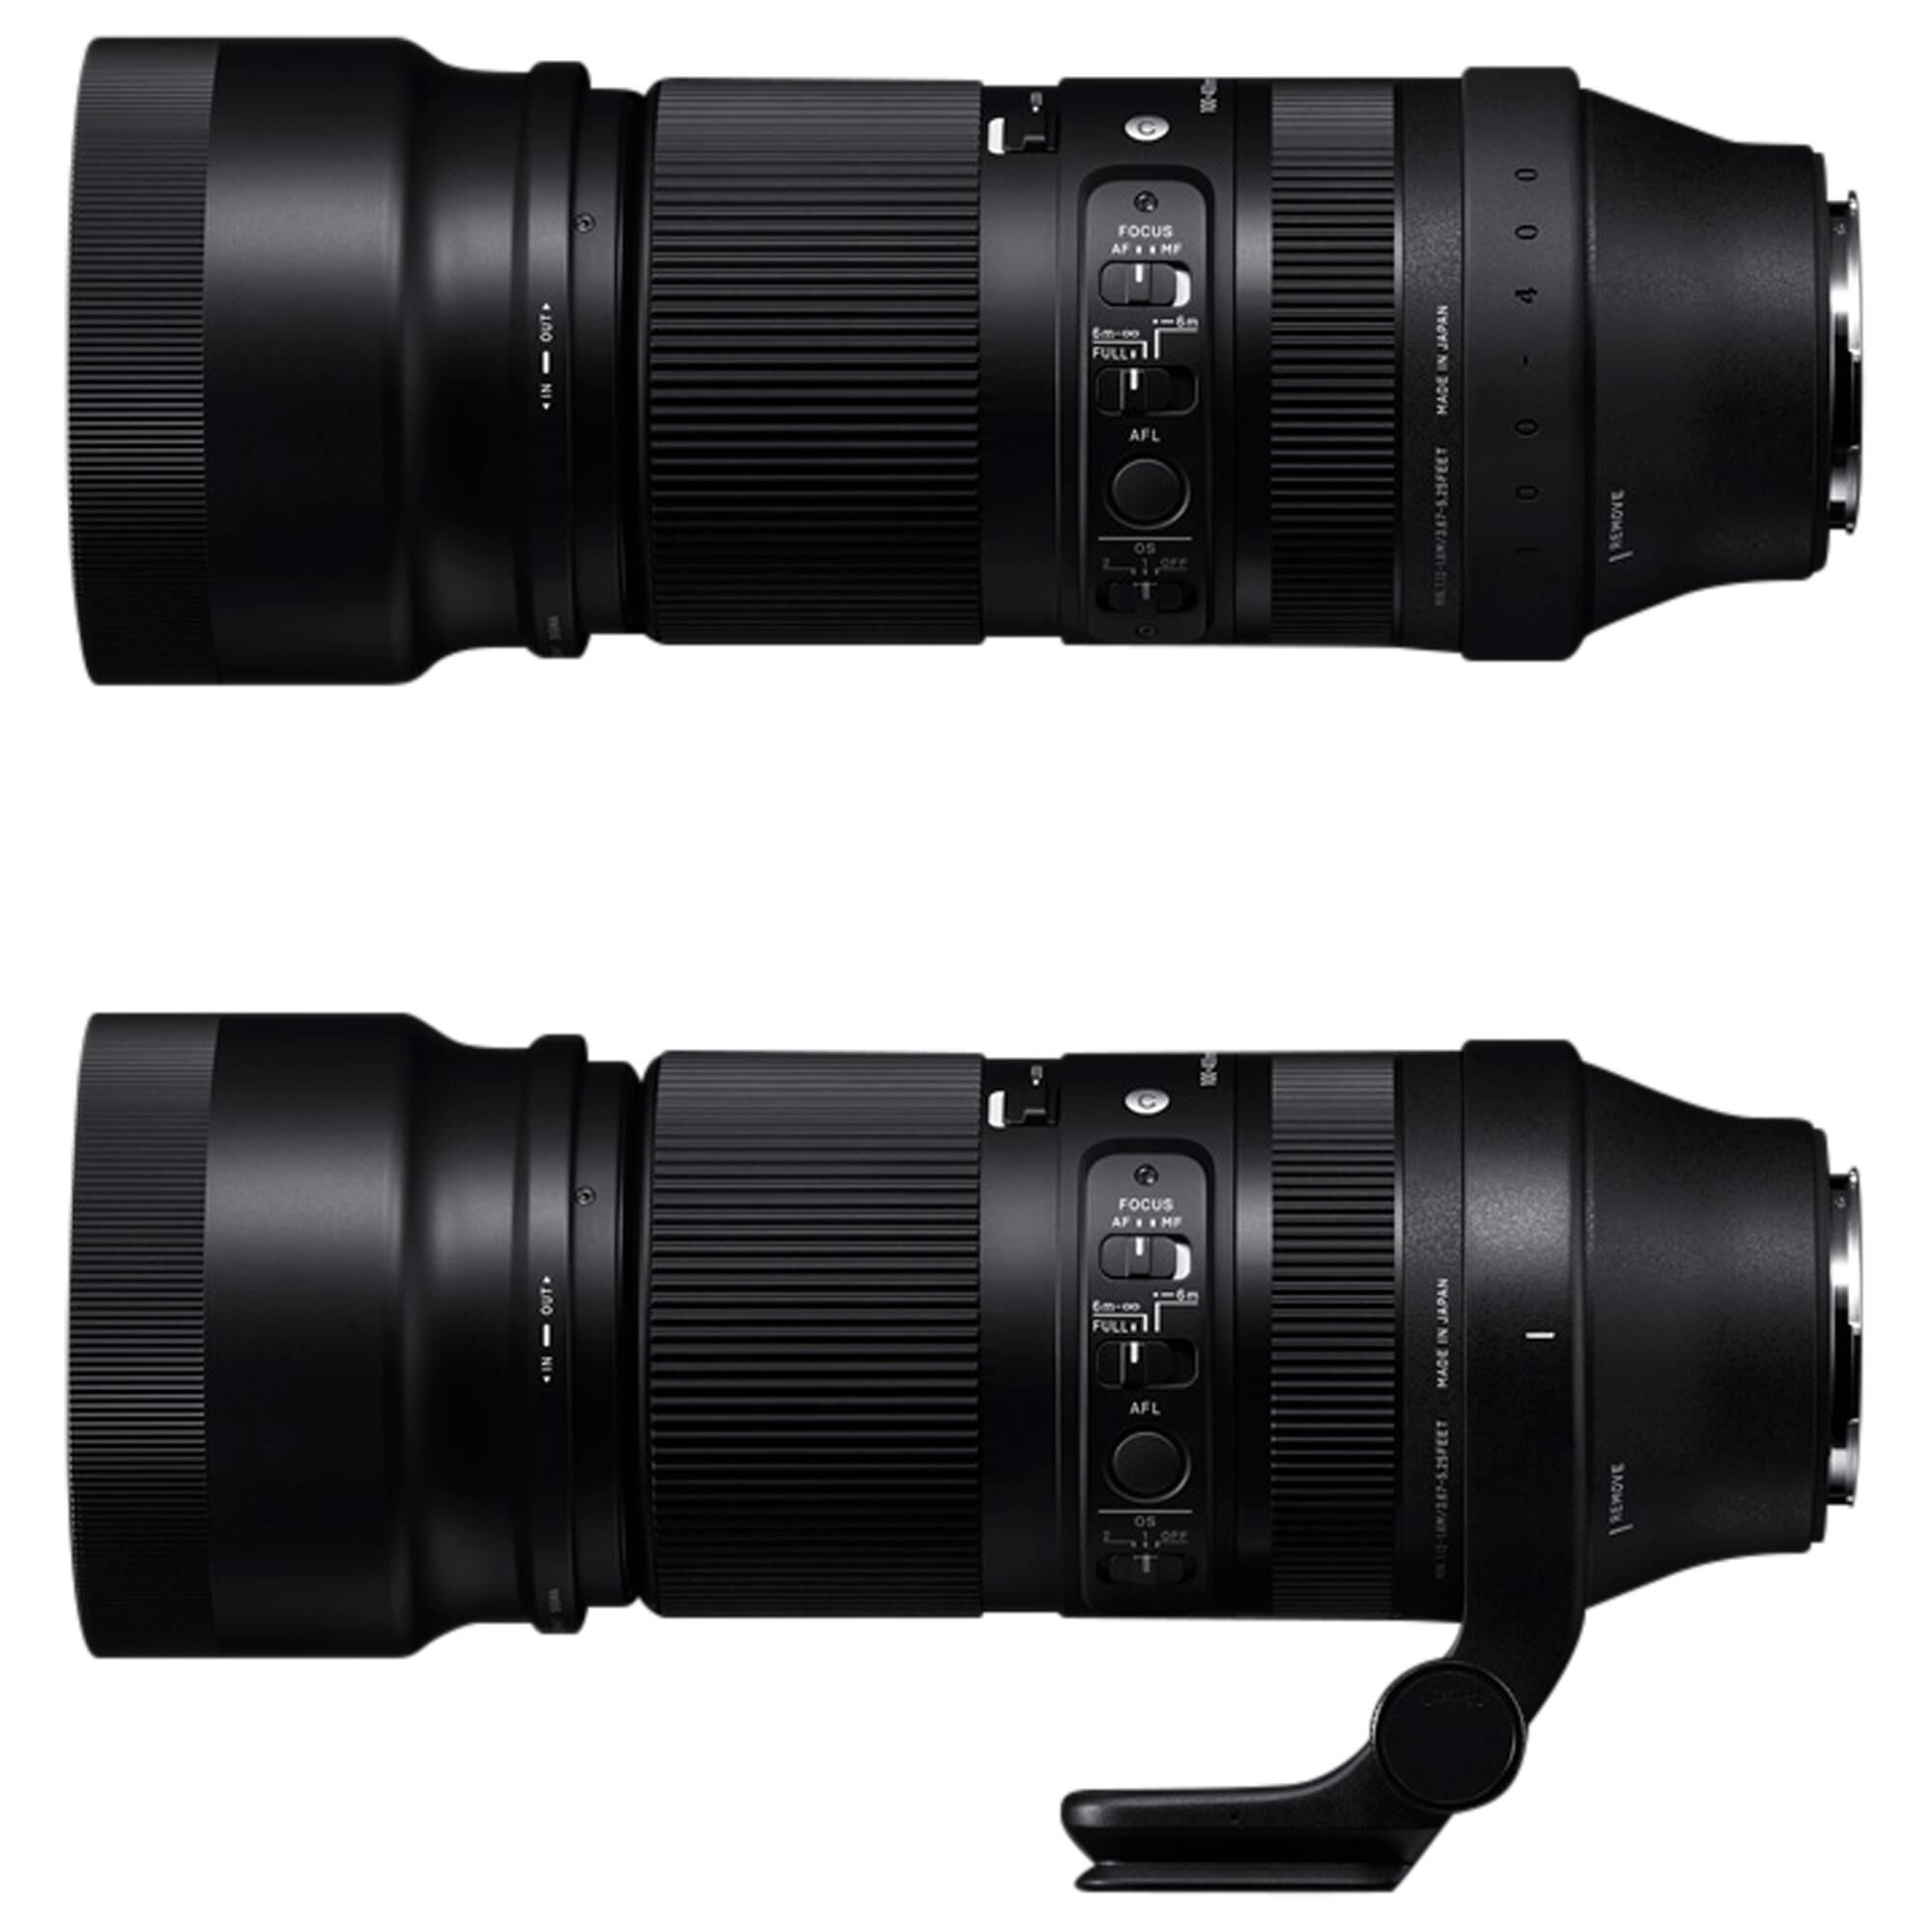 Sigma 100-400mm f/5-6.3 DG DN OS Contemporary Lens in Black | NFM